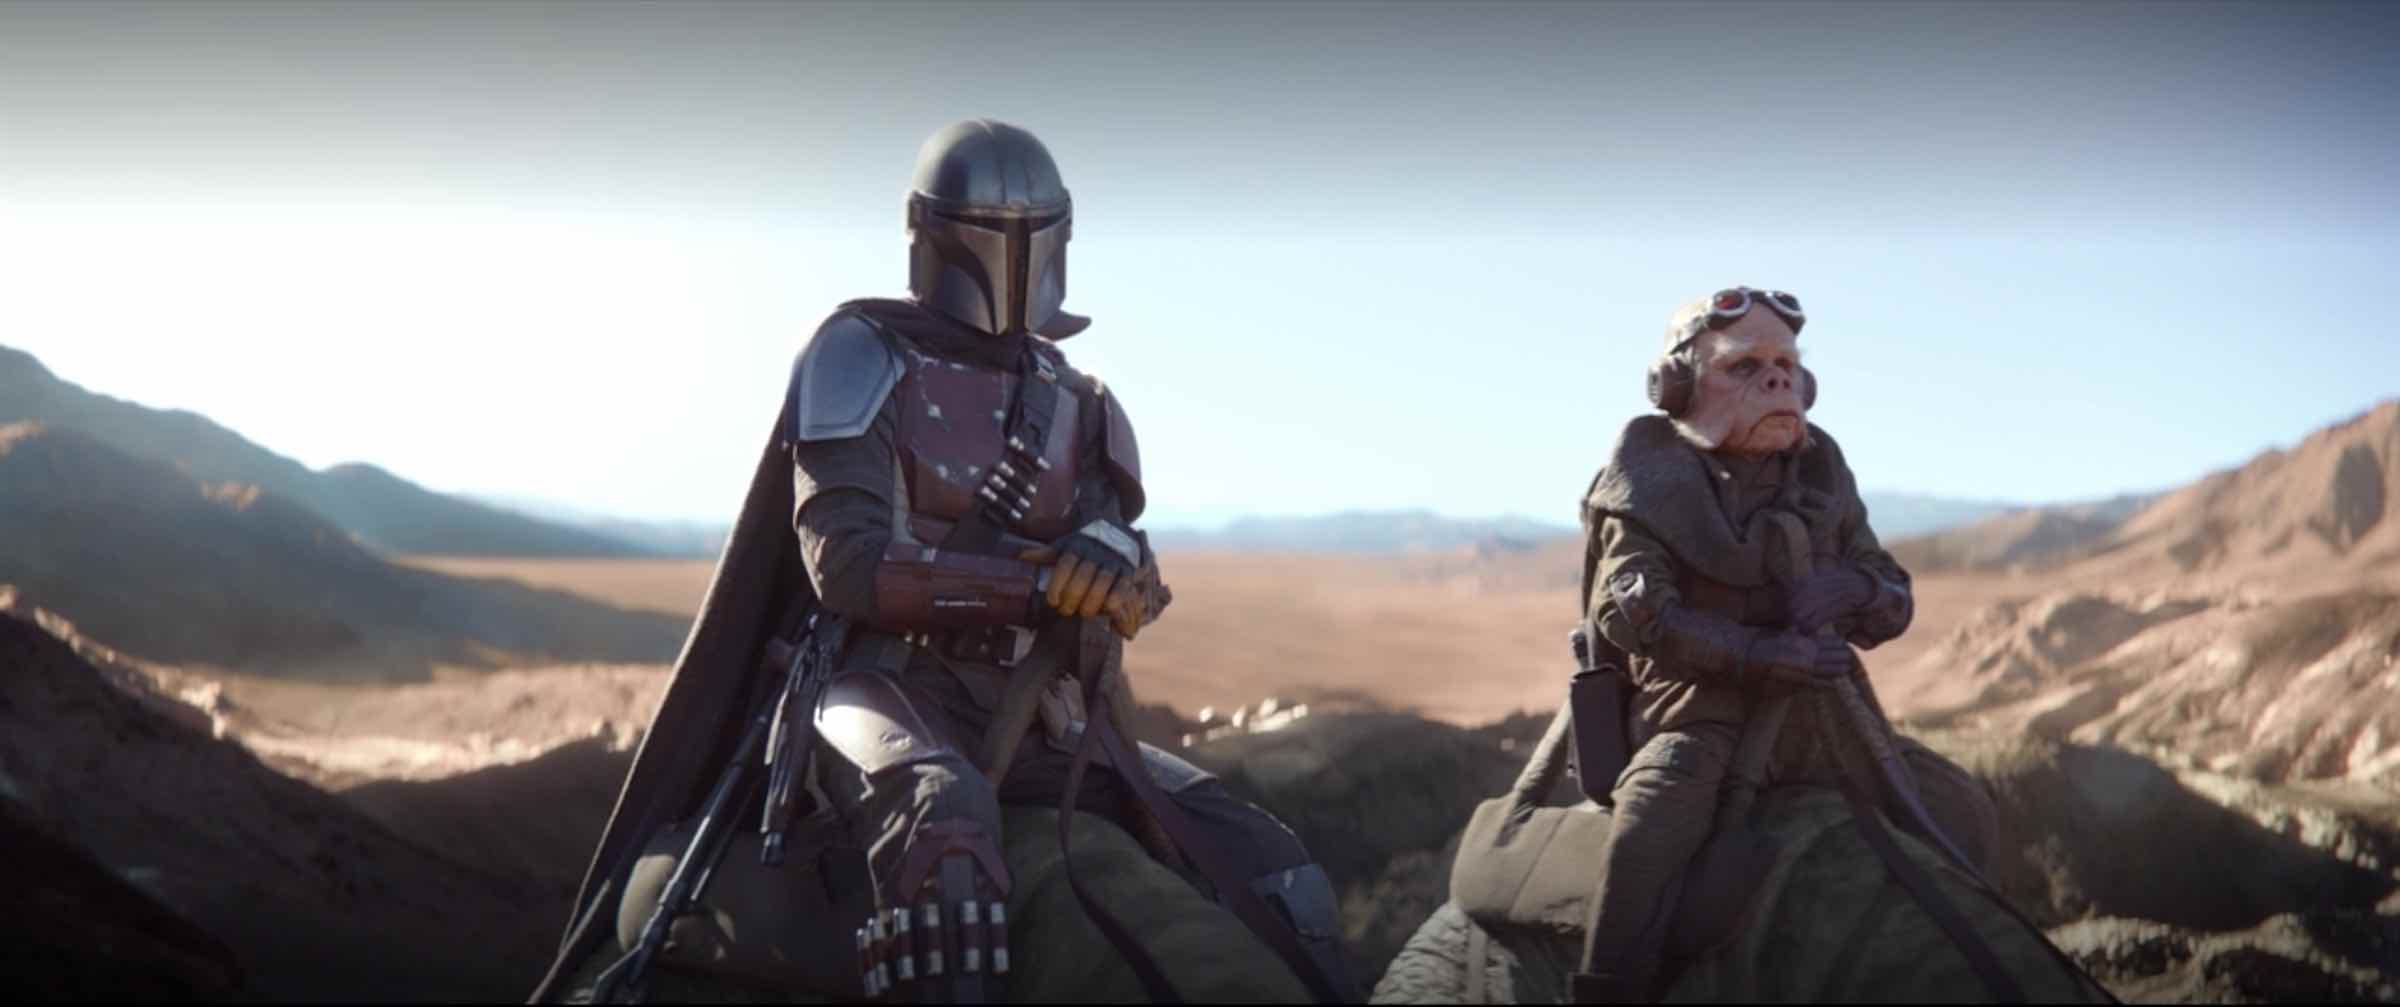 Exactly who is 'The Mandalorian'? Here are our favorite fan theories for the Disney+ 'Star Wars' series: Obi-Wan Kenobi? Alternate dimensions? Yippee!